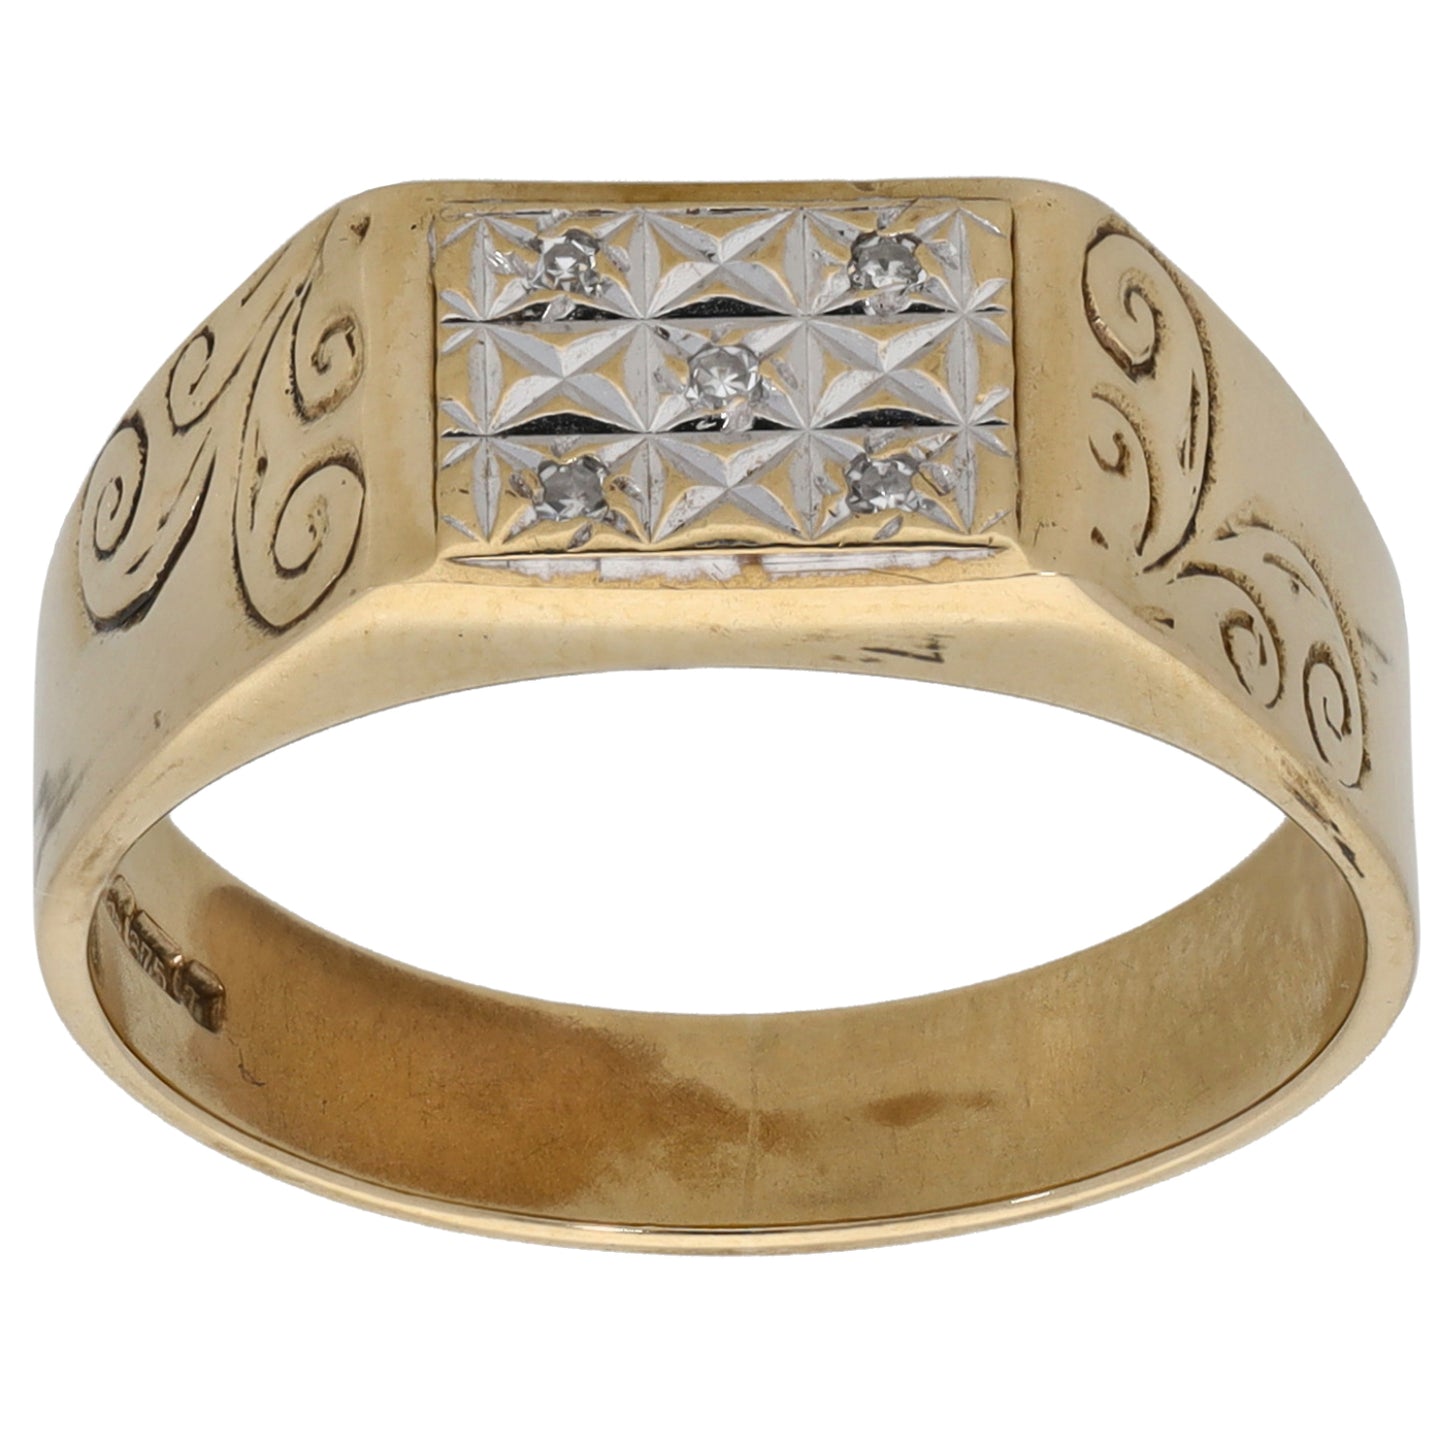 9ct Gold 0.05ct Diamond Patterned Signet Ring Size Q